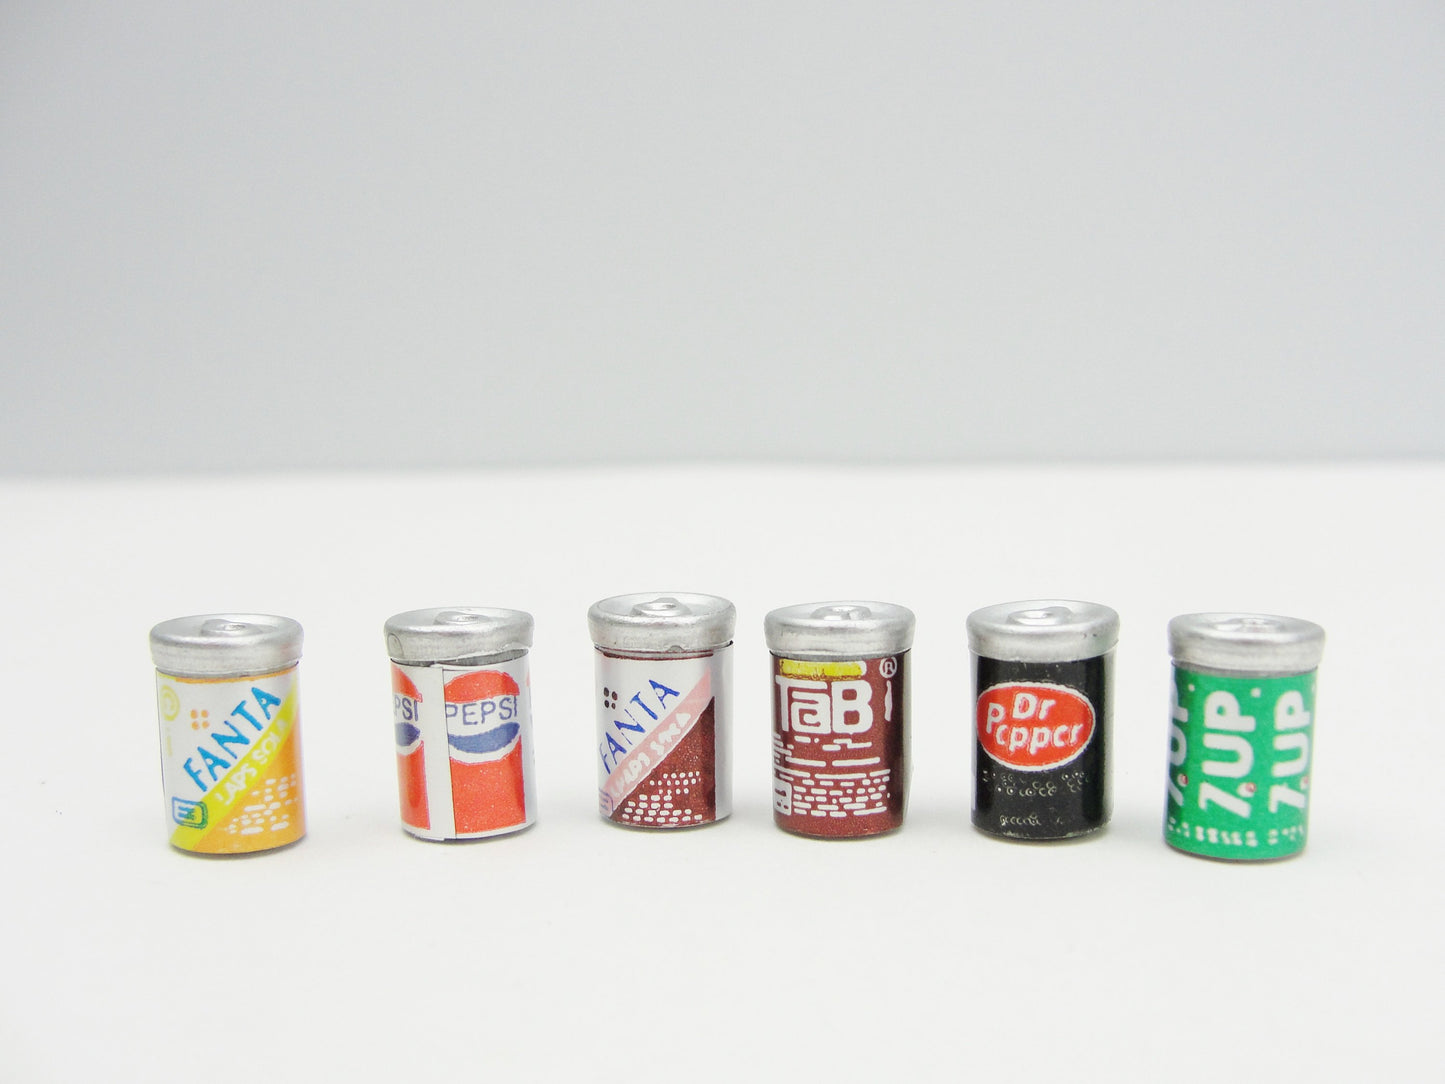 Dollhouse miniature soda cans set of 6 - Miniatures - Craft Supply House